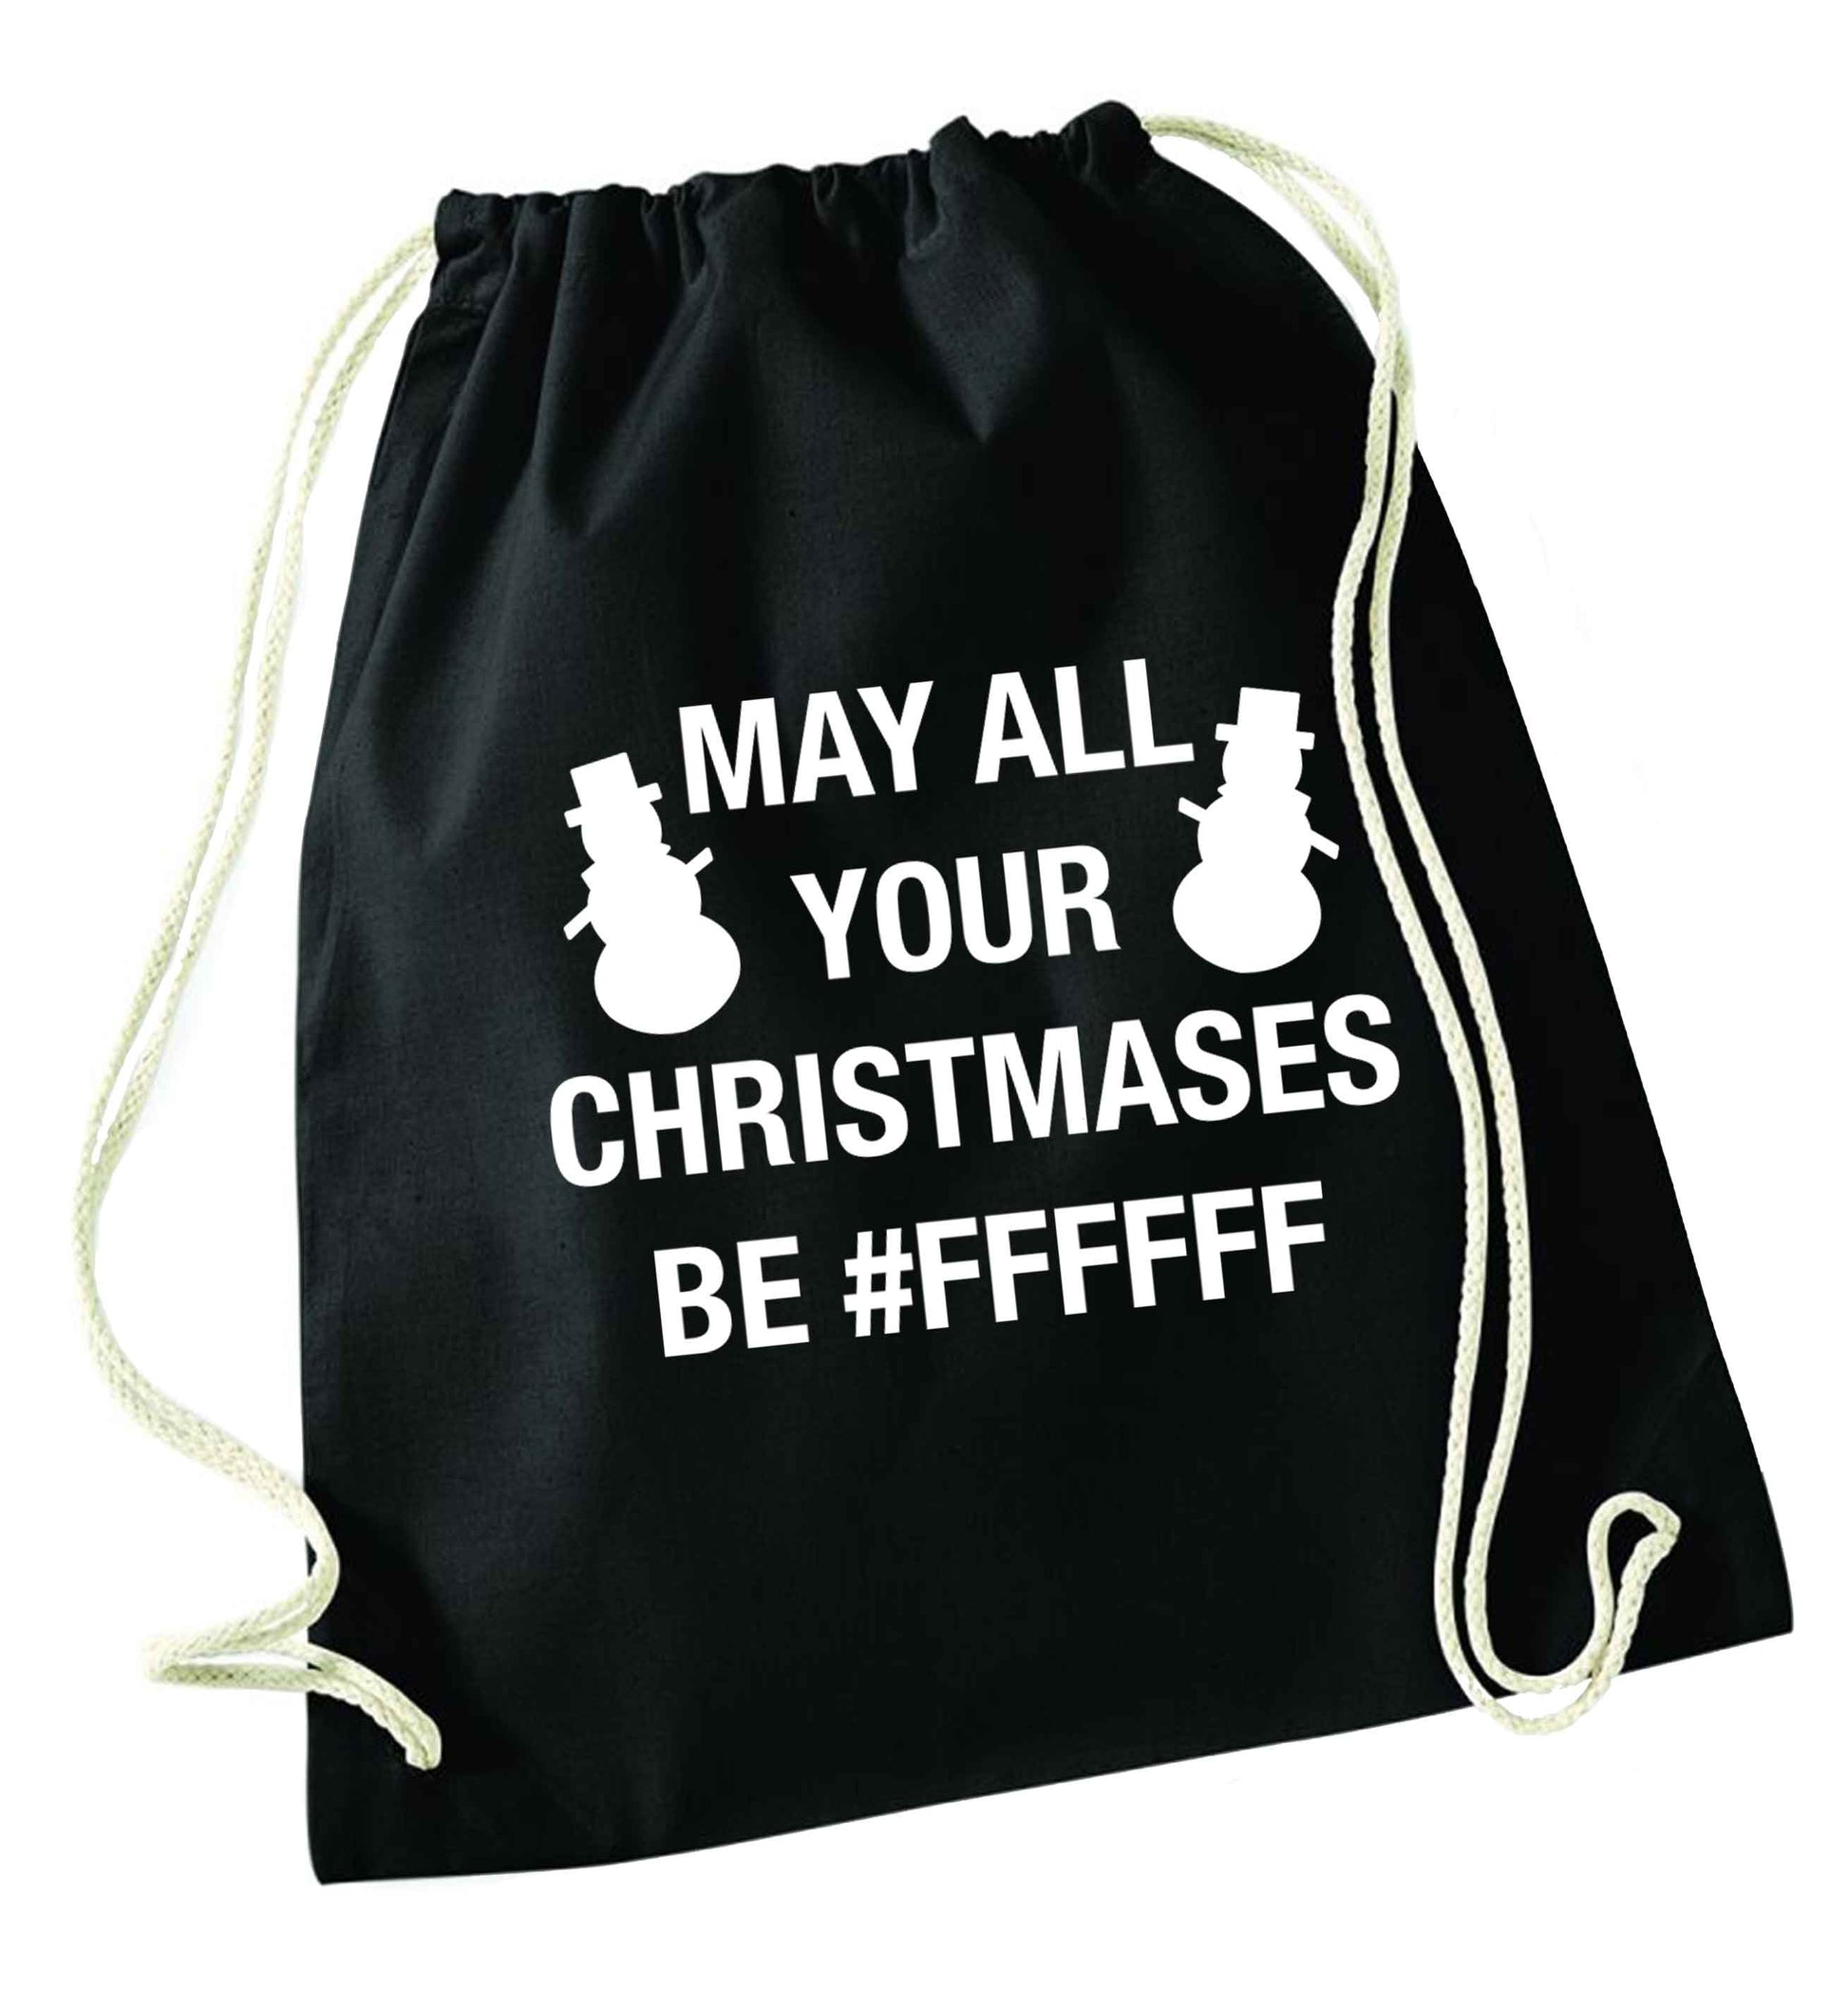 May all your Christmases be #FFFFFF black drawstring bag